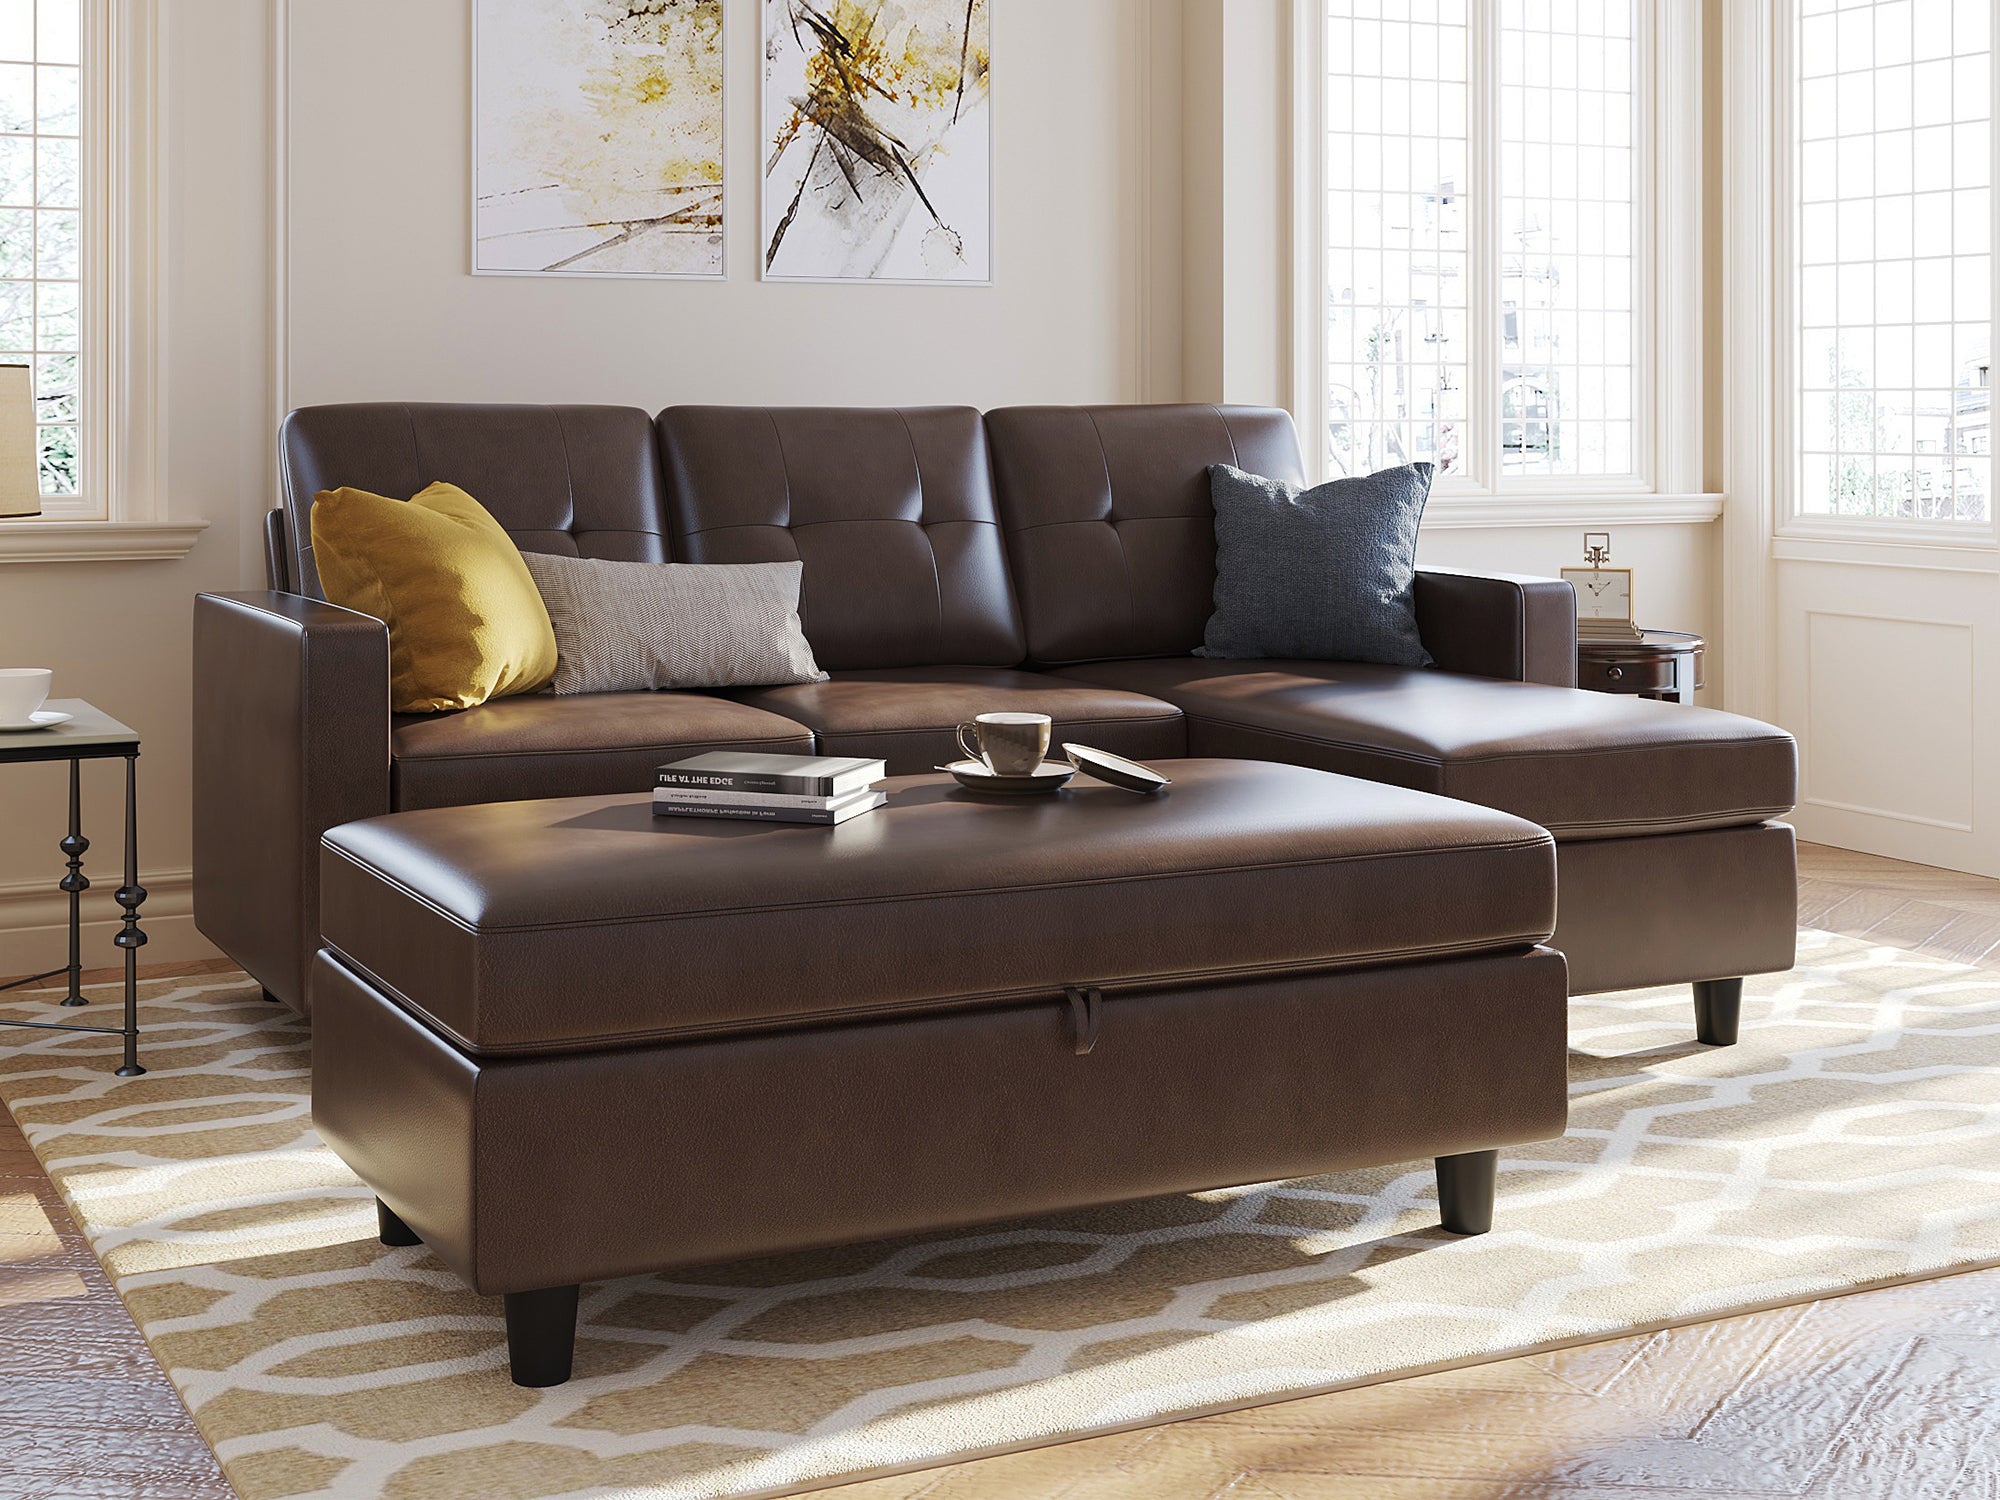 HONBAY L-Shaped Sectional Sofa Set with Storage Chaise & Ottoman